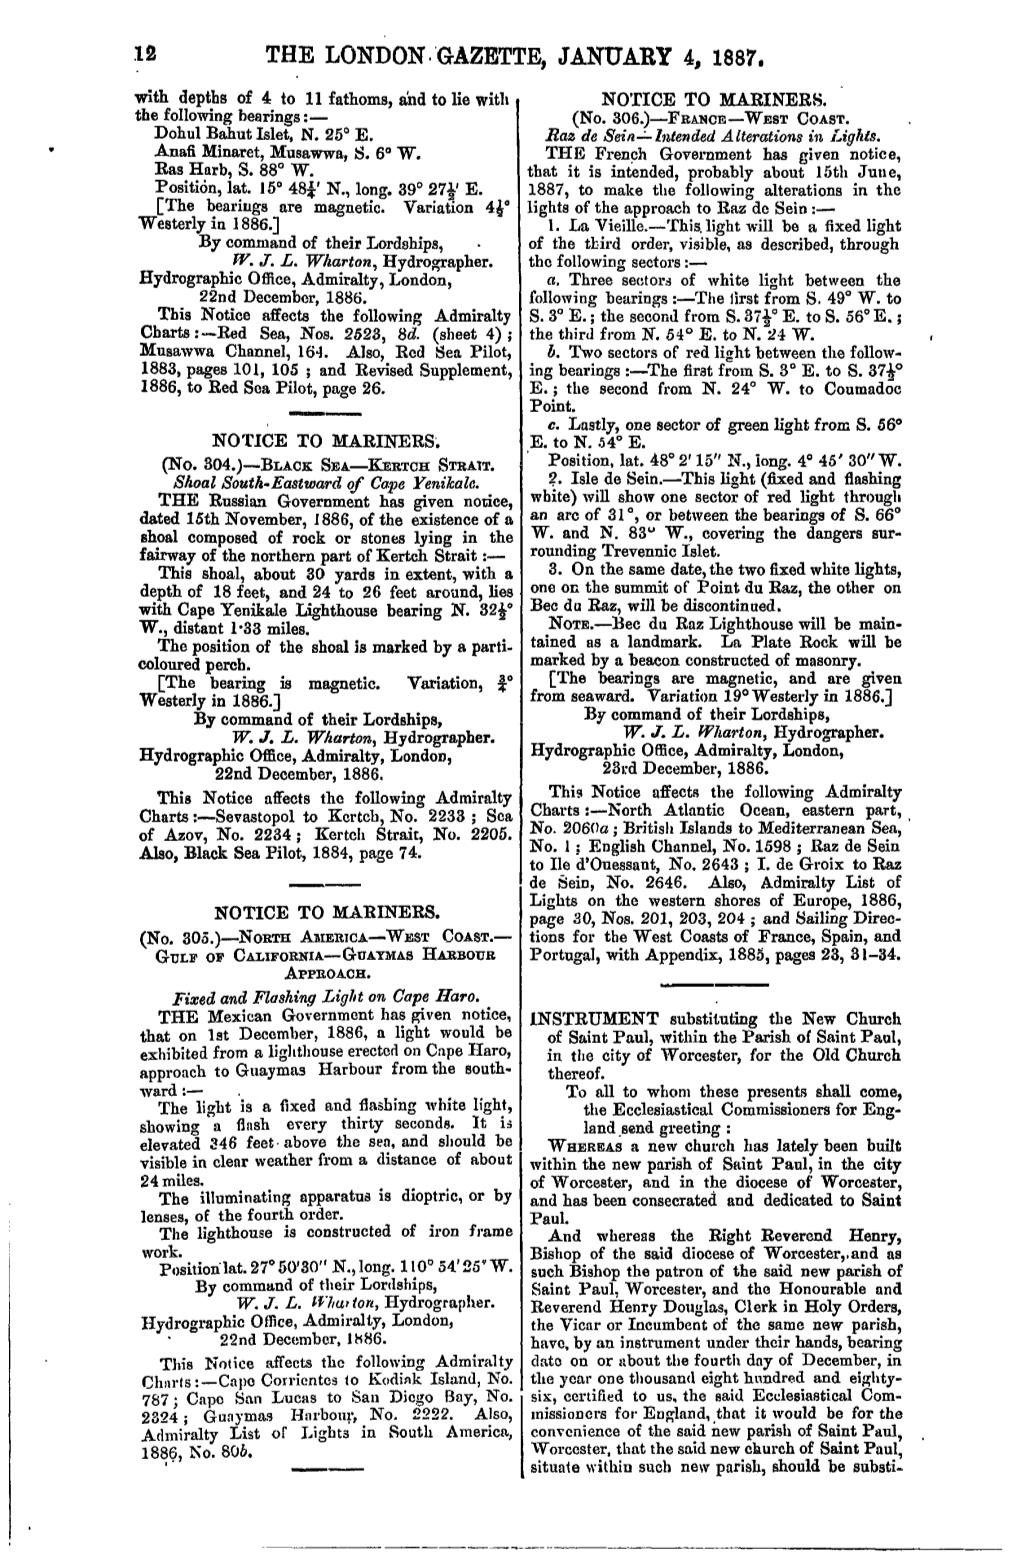 THE LONDON-GAZETTE, JANUARY 4, 1887, with Depths of 4 to 11 Fathoms, and to Lie with NOTICE to MARINERS